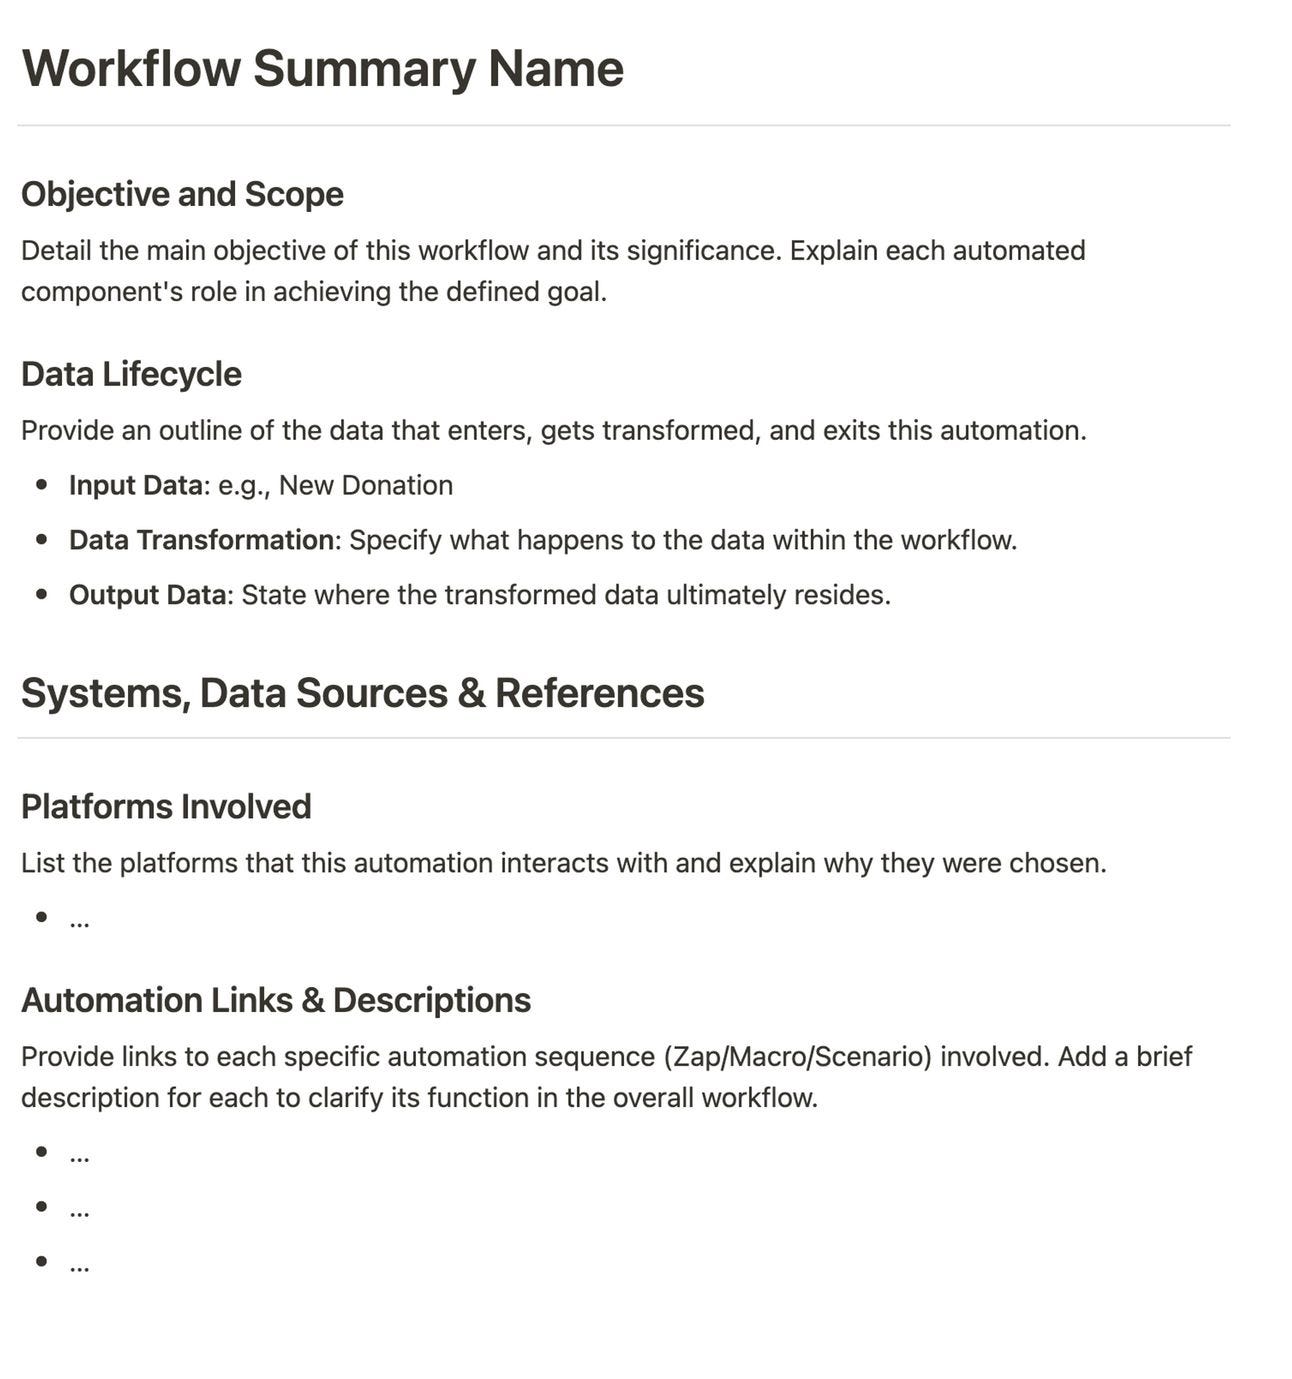 Workflow automation documentation for Typefully, Google Docs, and Airtable integration.